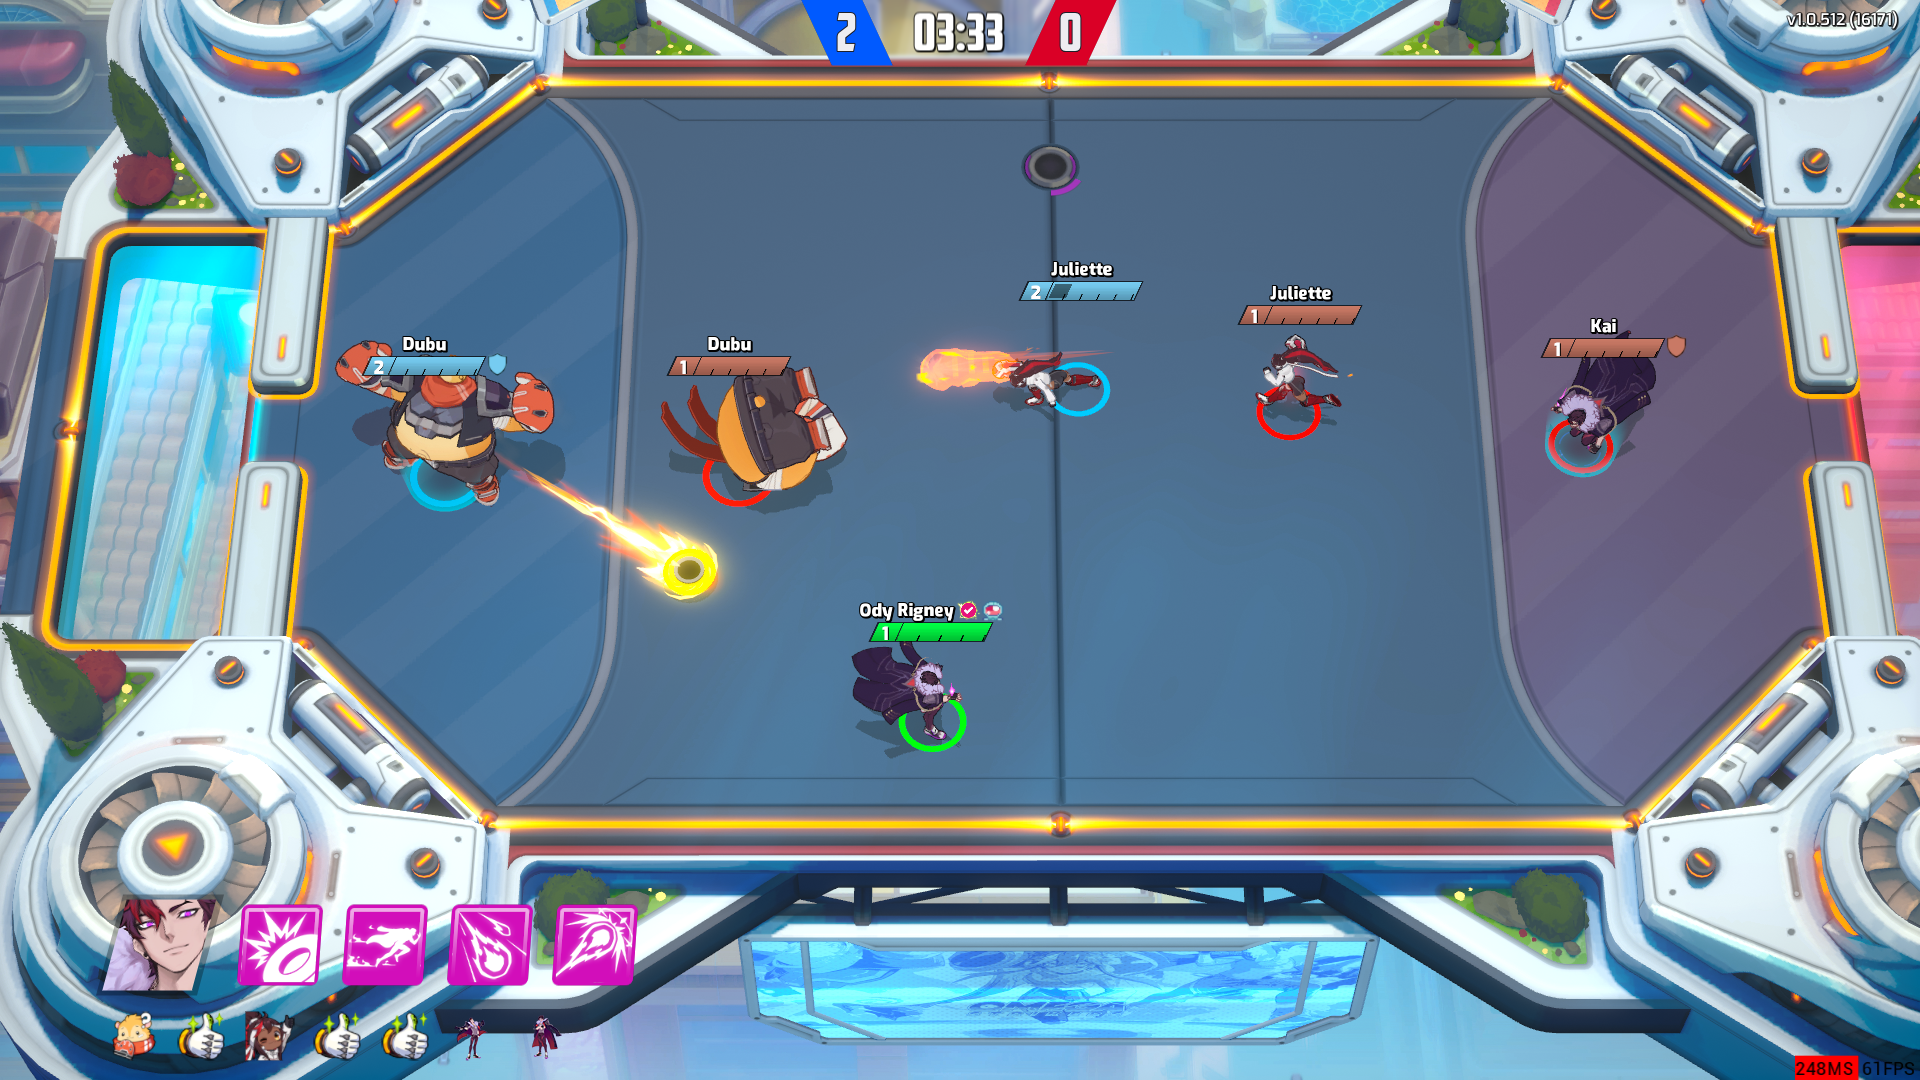 Omega Strikers - A six player game, with three players on each team. The characters are playing a futuristic, high tech game of soccer with a bright yellow spinning puck.